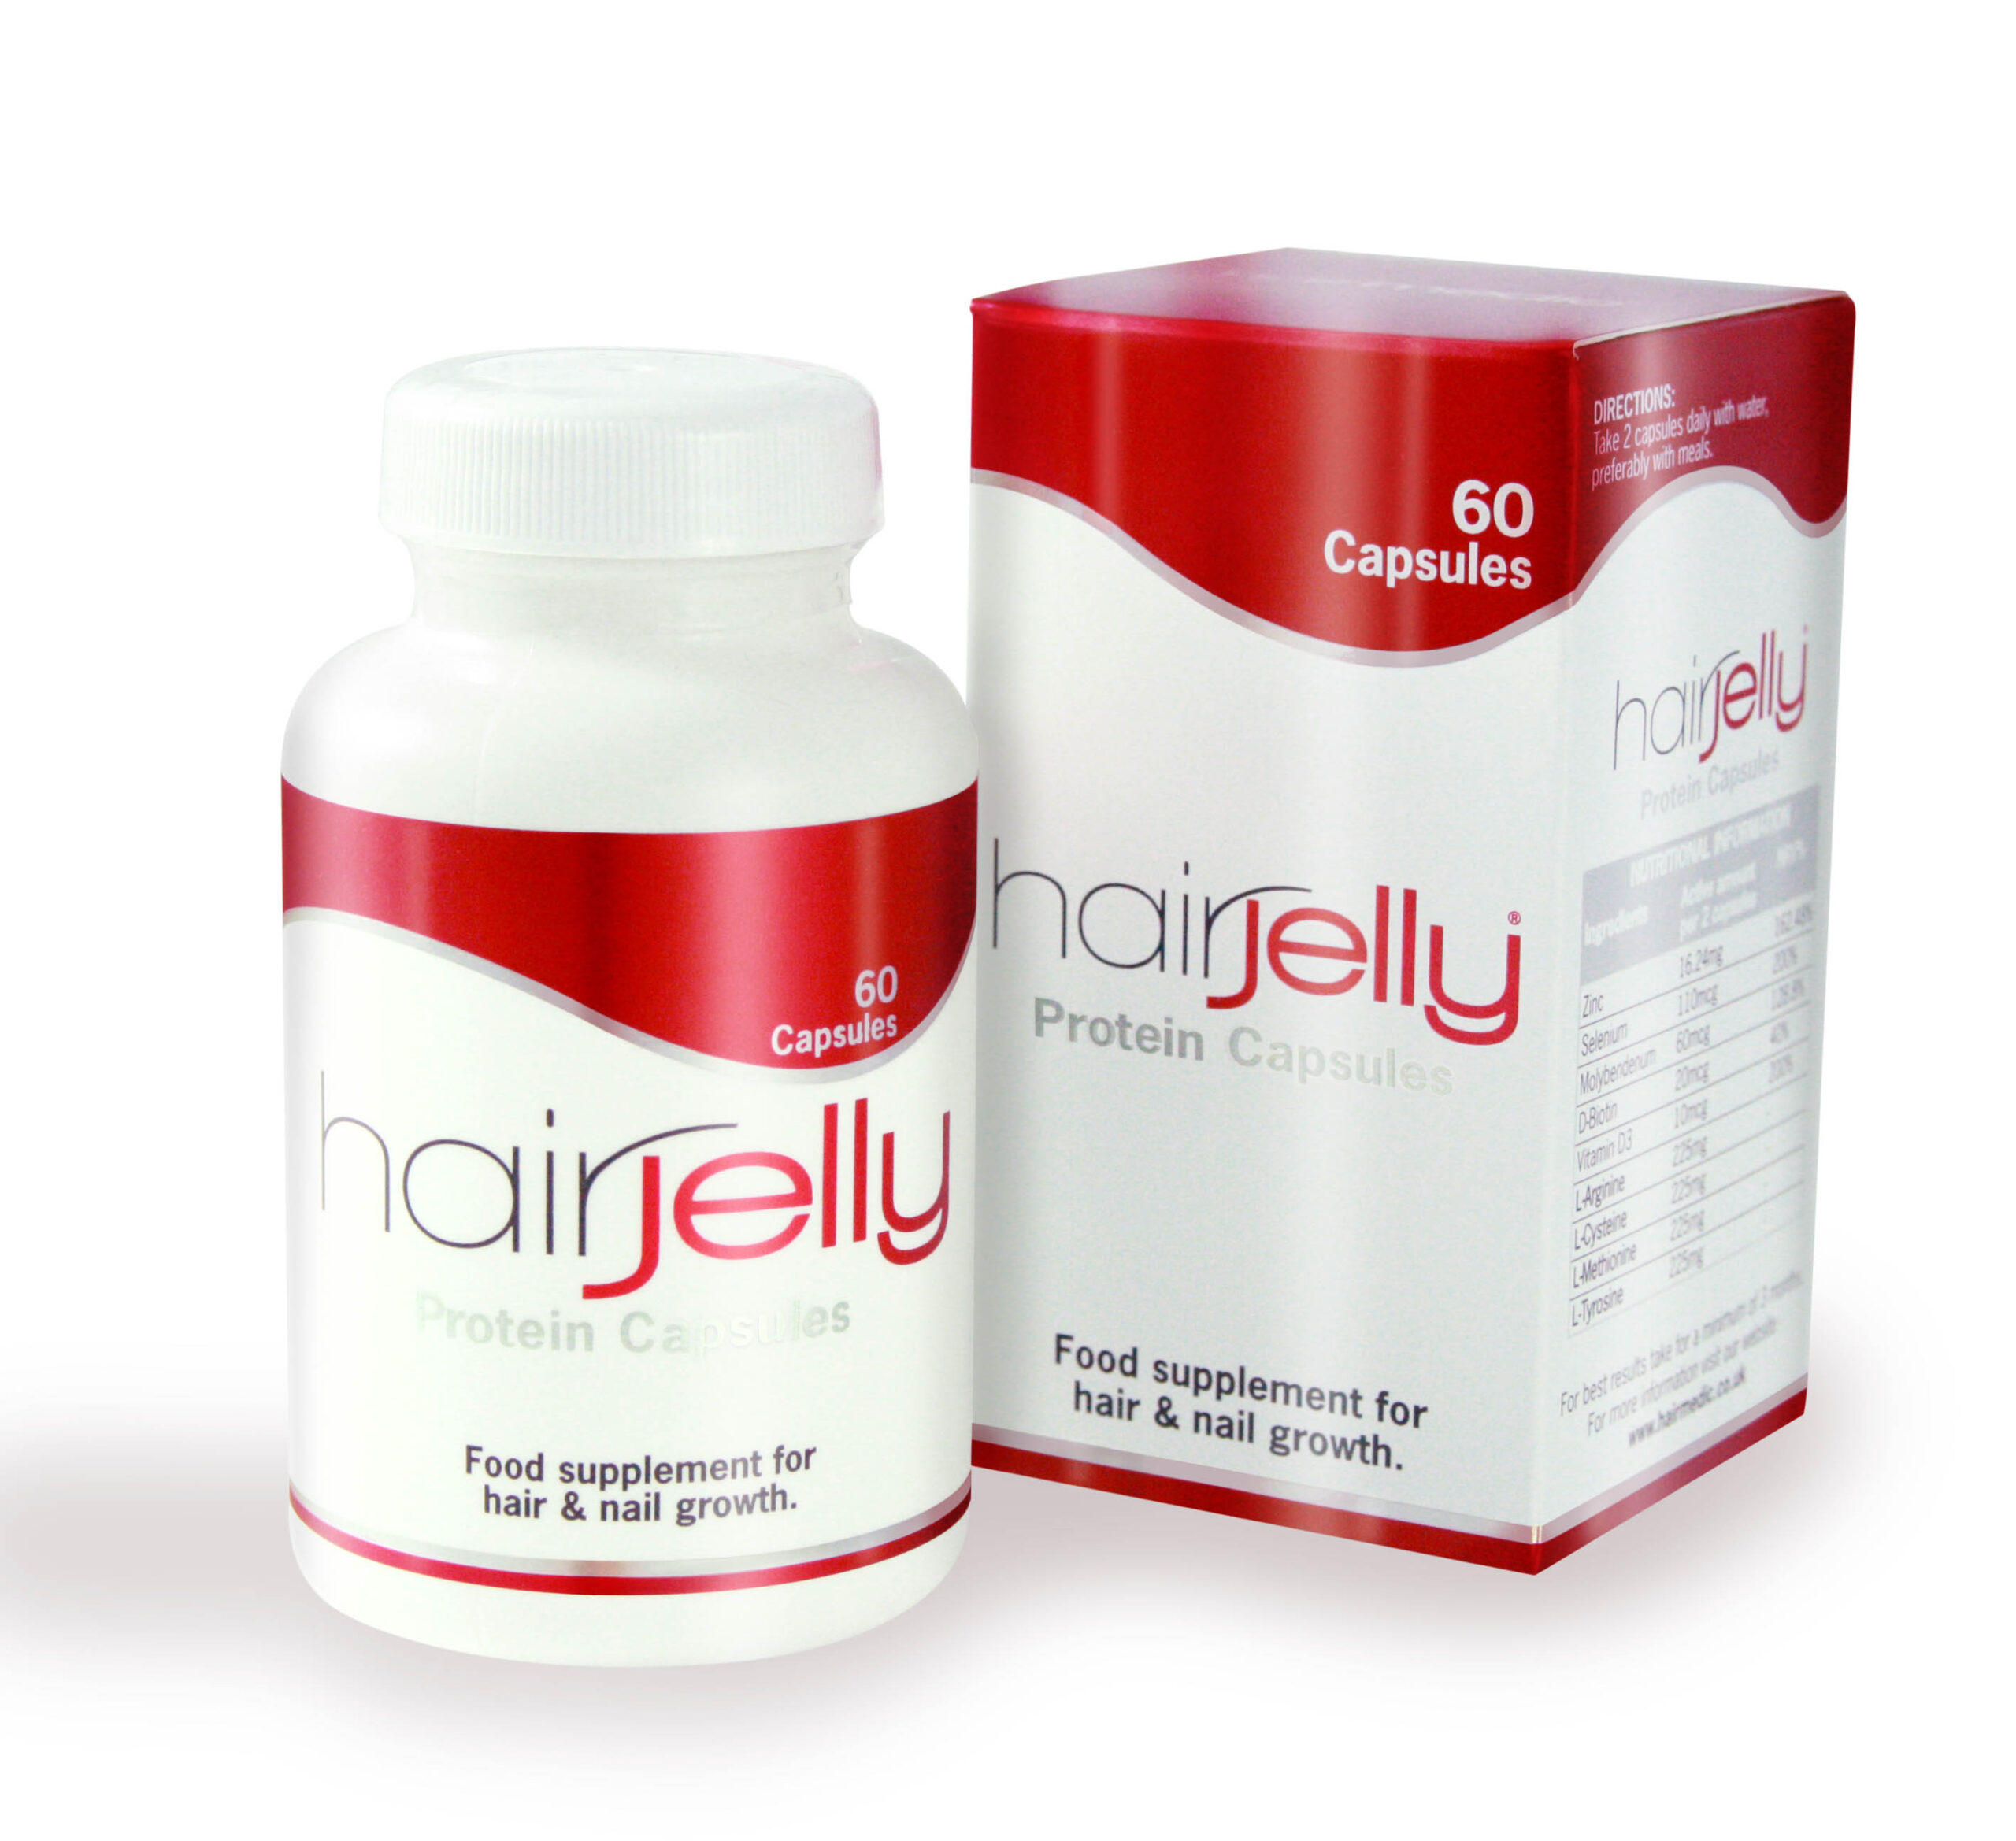 Hairjelly Protein Capsules for Hair Loss | Hairmedic